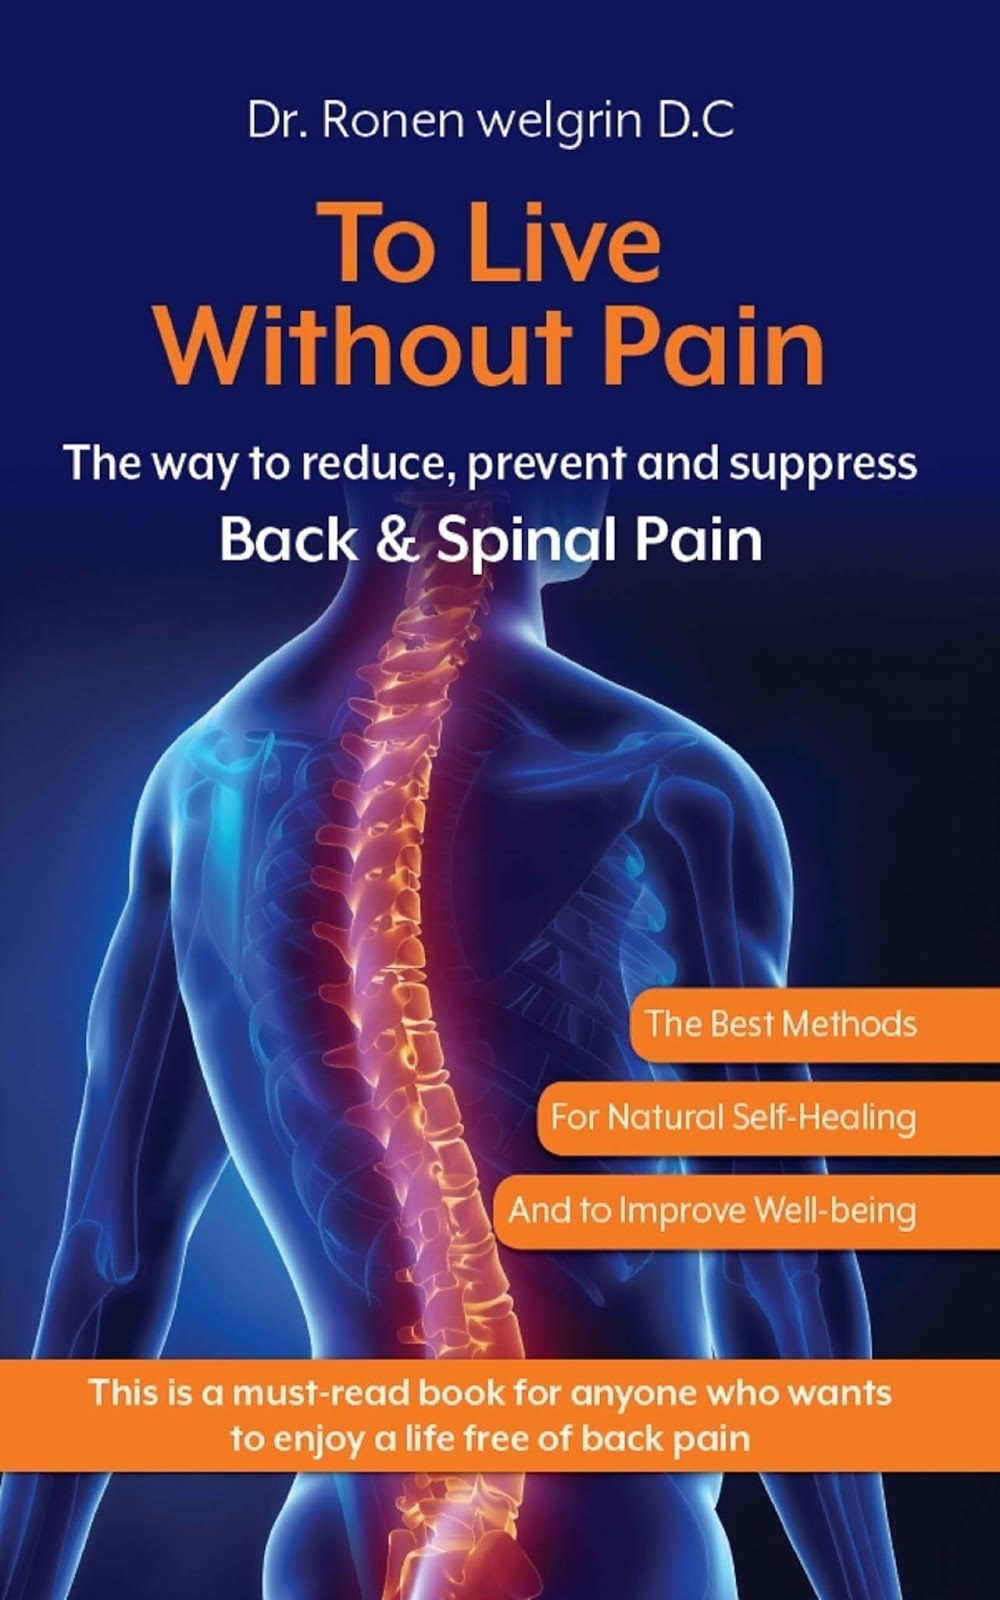 Life without Pain. Pain without e. Books for children Front back Spine Cover.